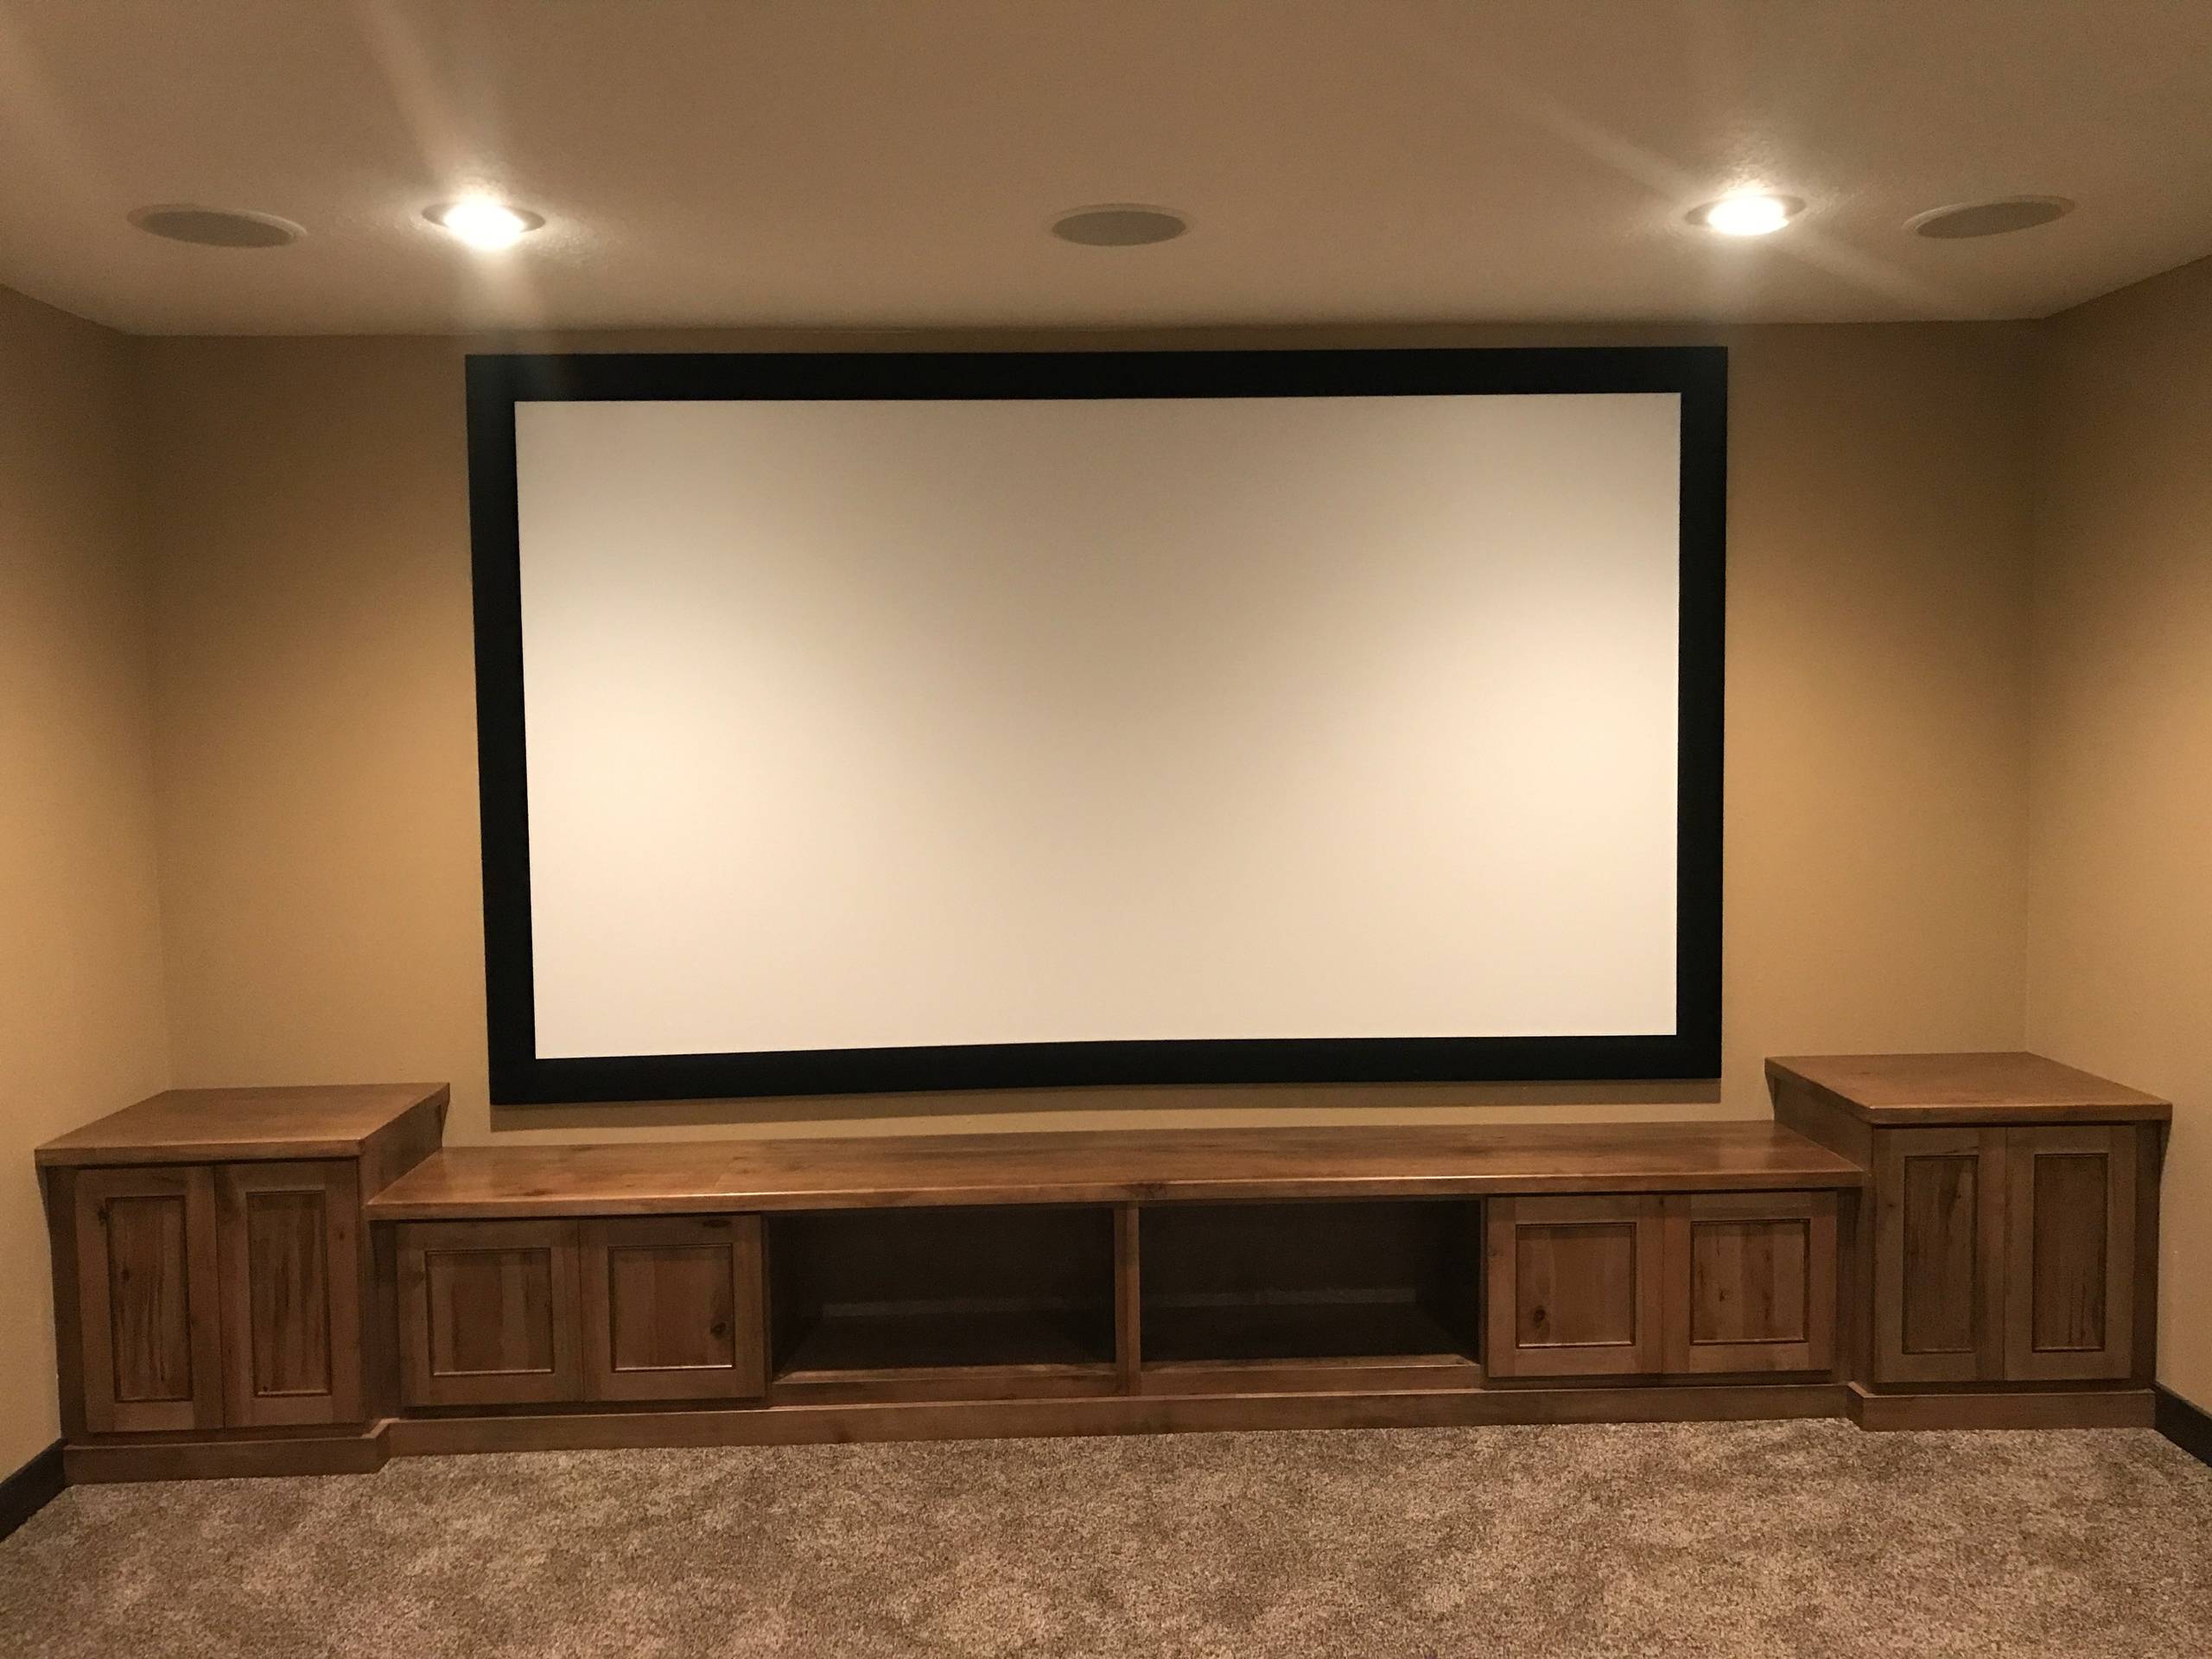 75 Rustic Living Space with a Projector Screen Ideas You'll Love -  February, 2023 | Houzz